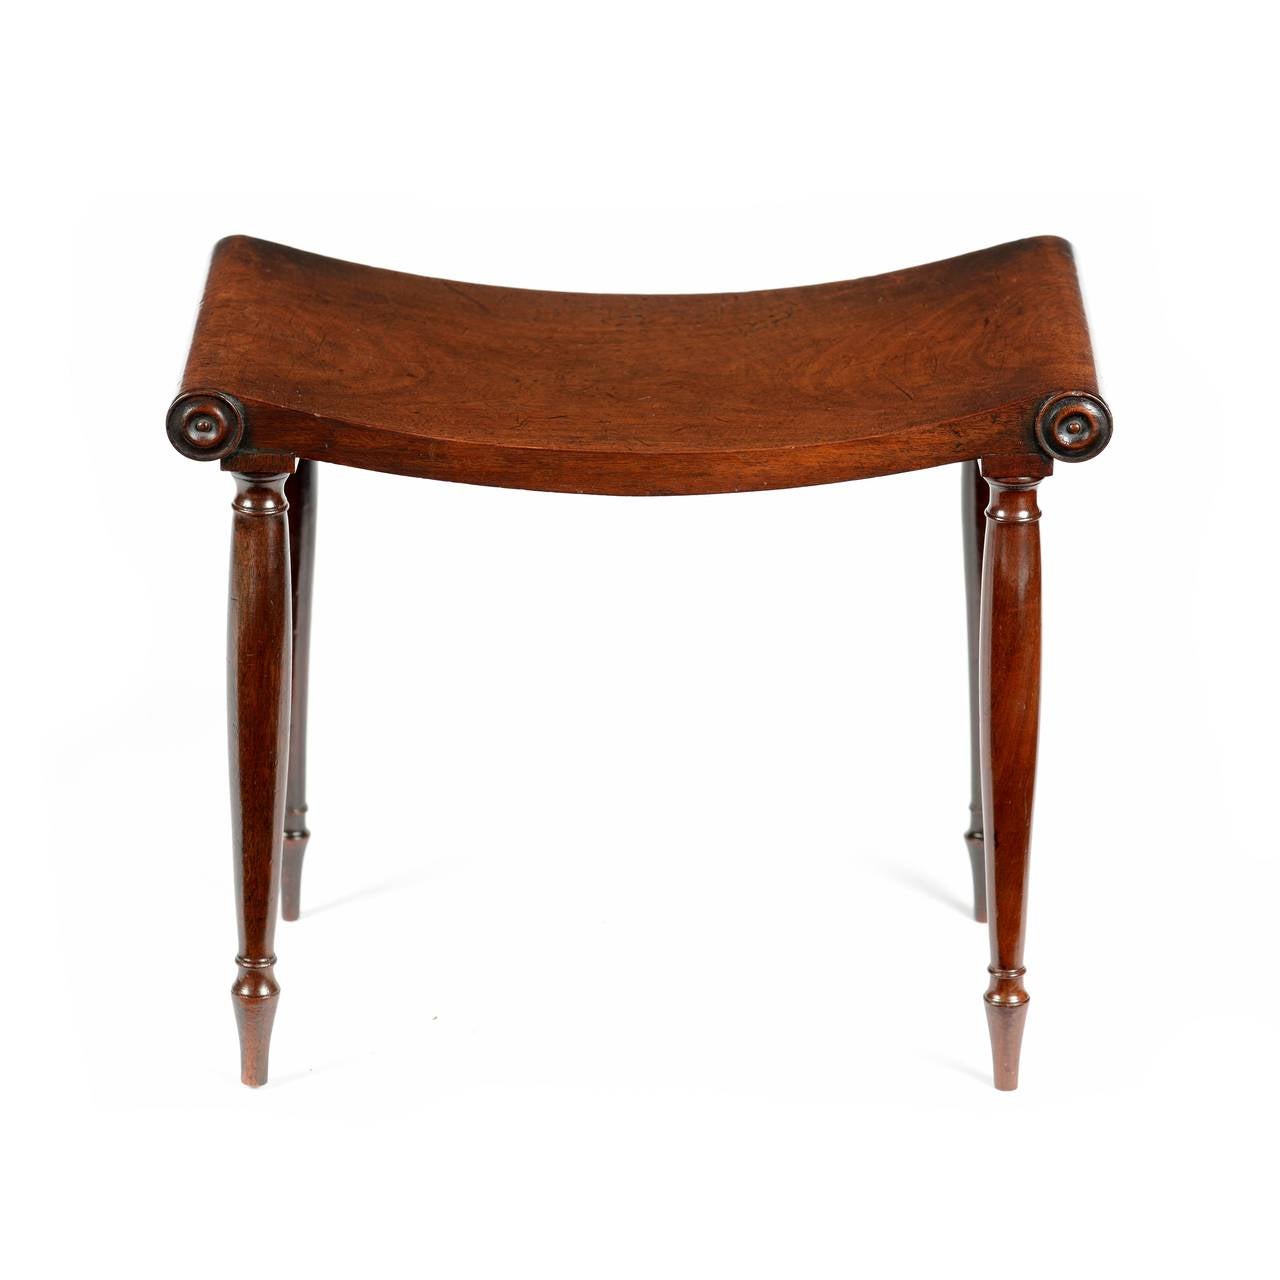 A rare George III mahogany stool in the manner of Marsh and Tatham. The solid mahogany top, shaped in the form of a gentle convex curve, with rounded ends and applied turned roundels. The turned waisted and tapering legs, with a ring turned ankle